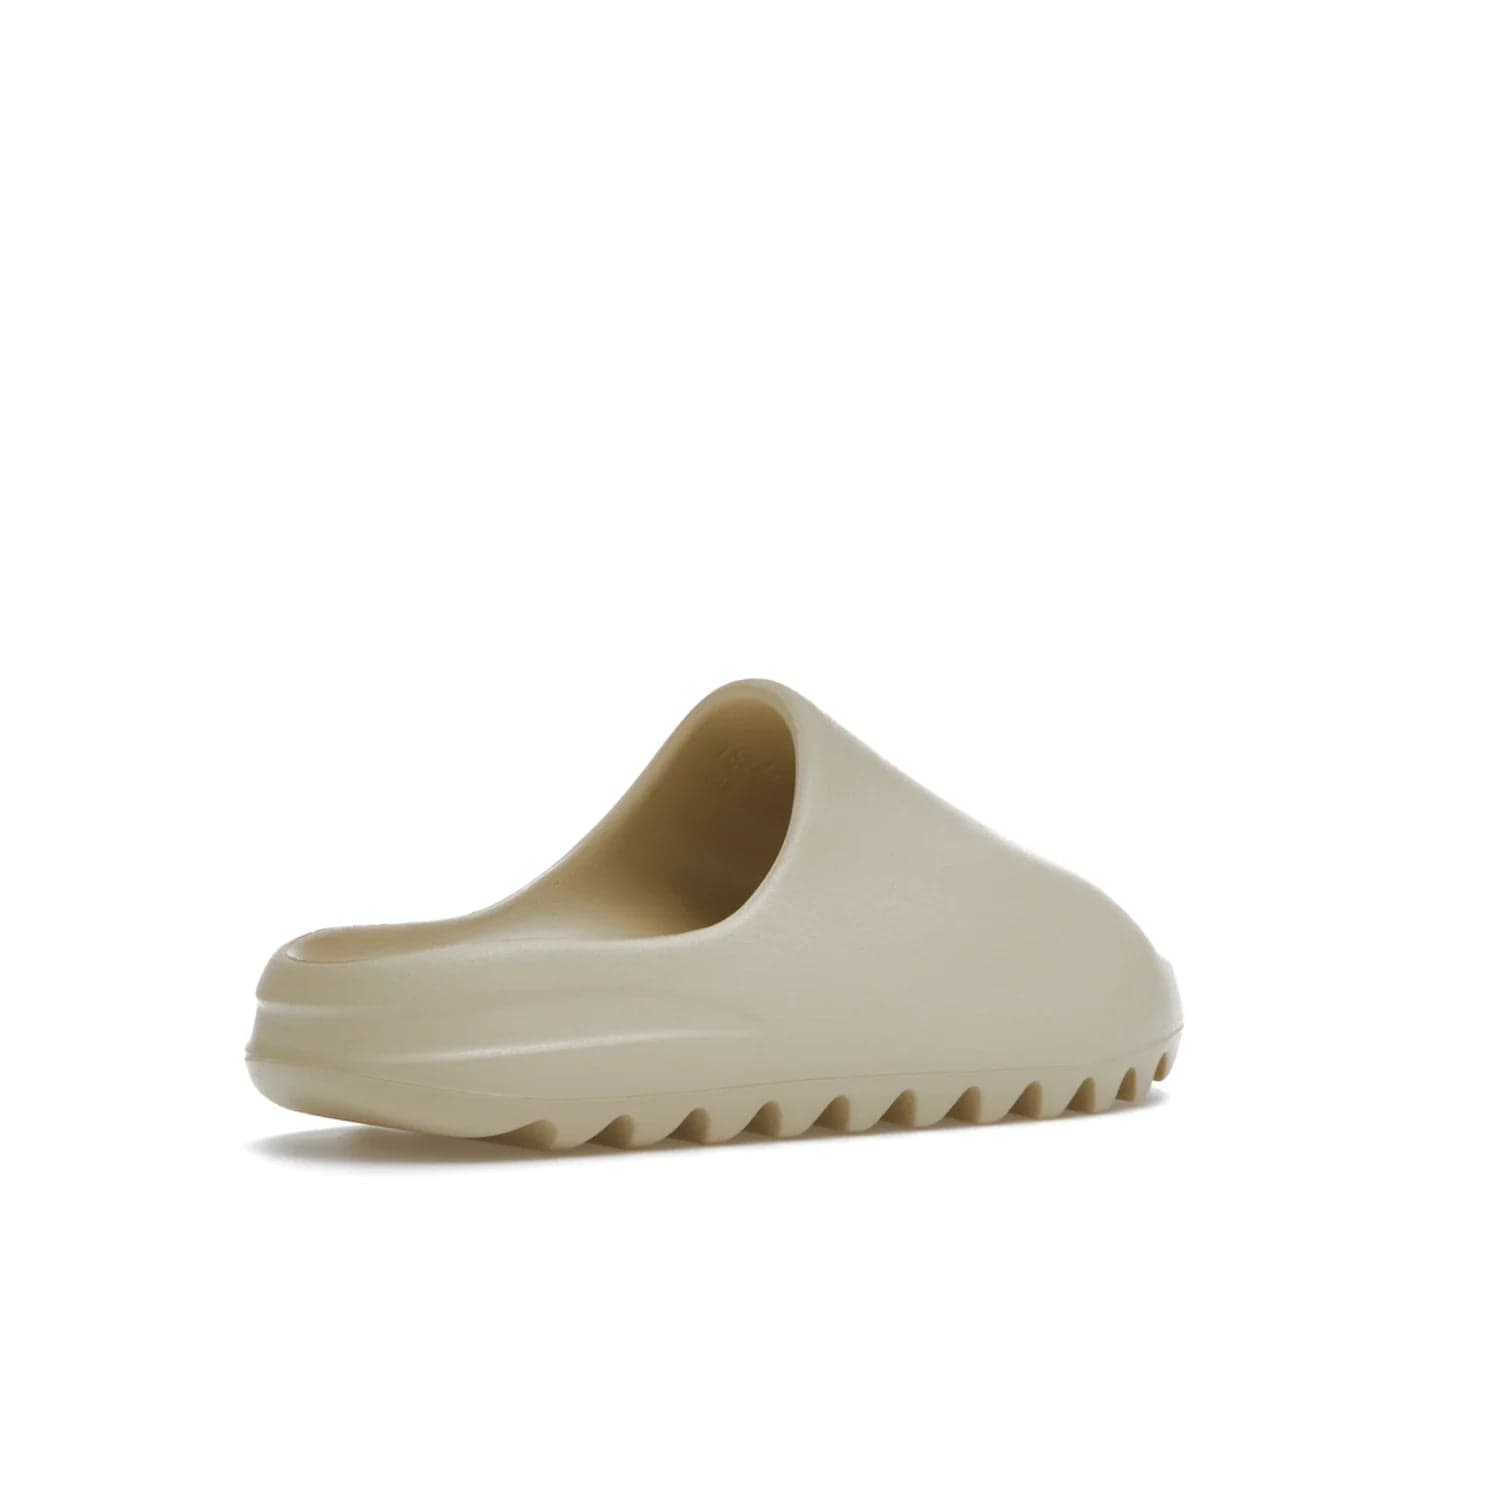 adidas Yeezy Slide Bone (2022 Restock) - Image 33 - Only at www.BallersClubKickz.com - Stay comfy with the adidas Yeezy Slide Bone - a fashionable silhouette with all-day comfort. This Bone/Bone/Bone colorway combines style and comfort with a pebbled texture and grooved sole. Restocked in May 2022, this shoe is the perfect addition to your collection.